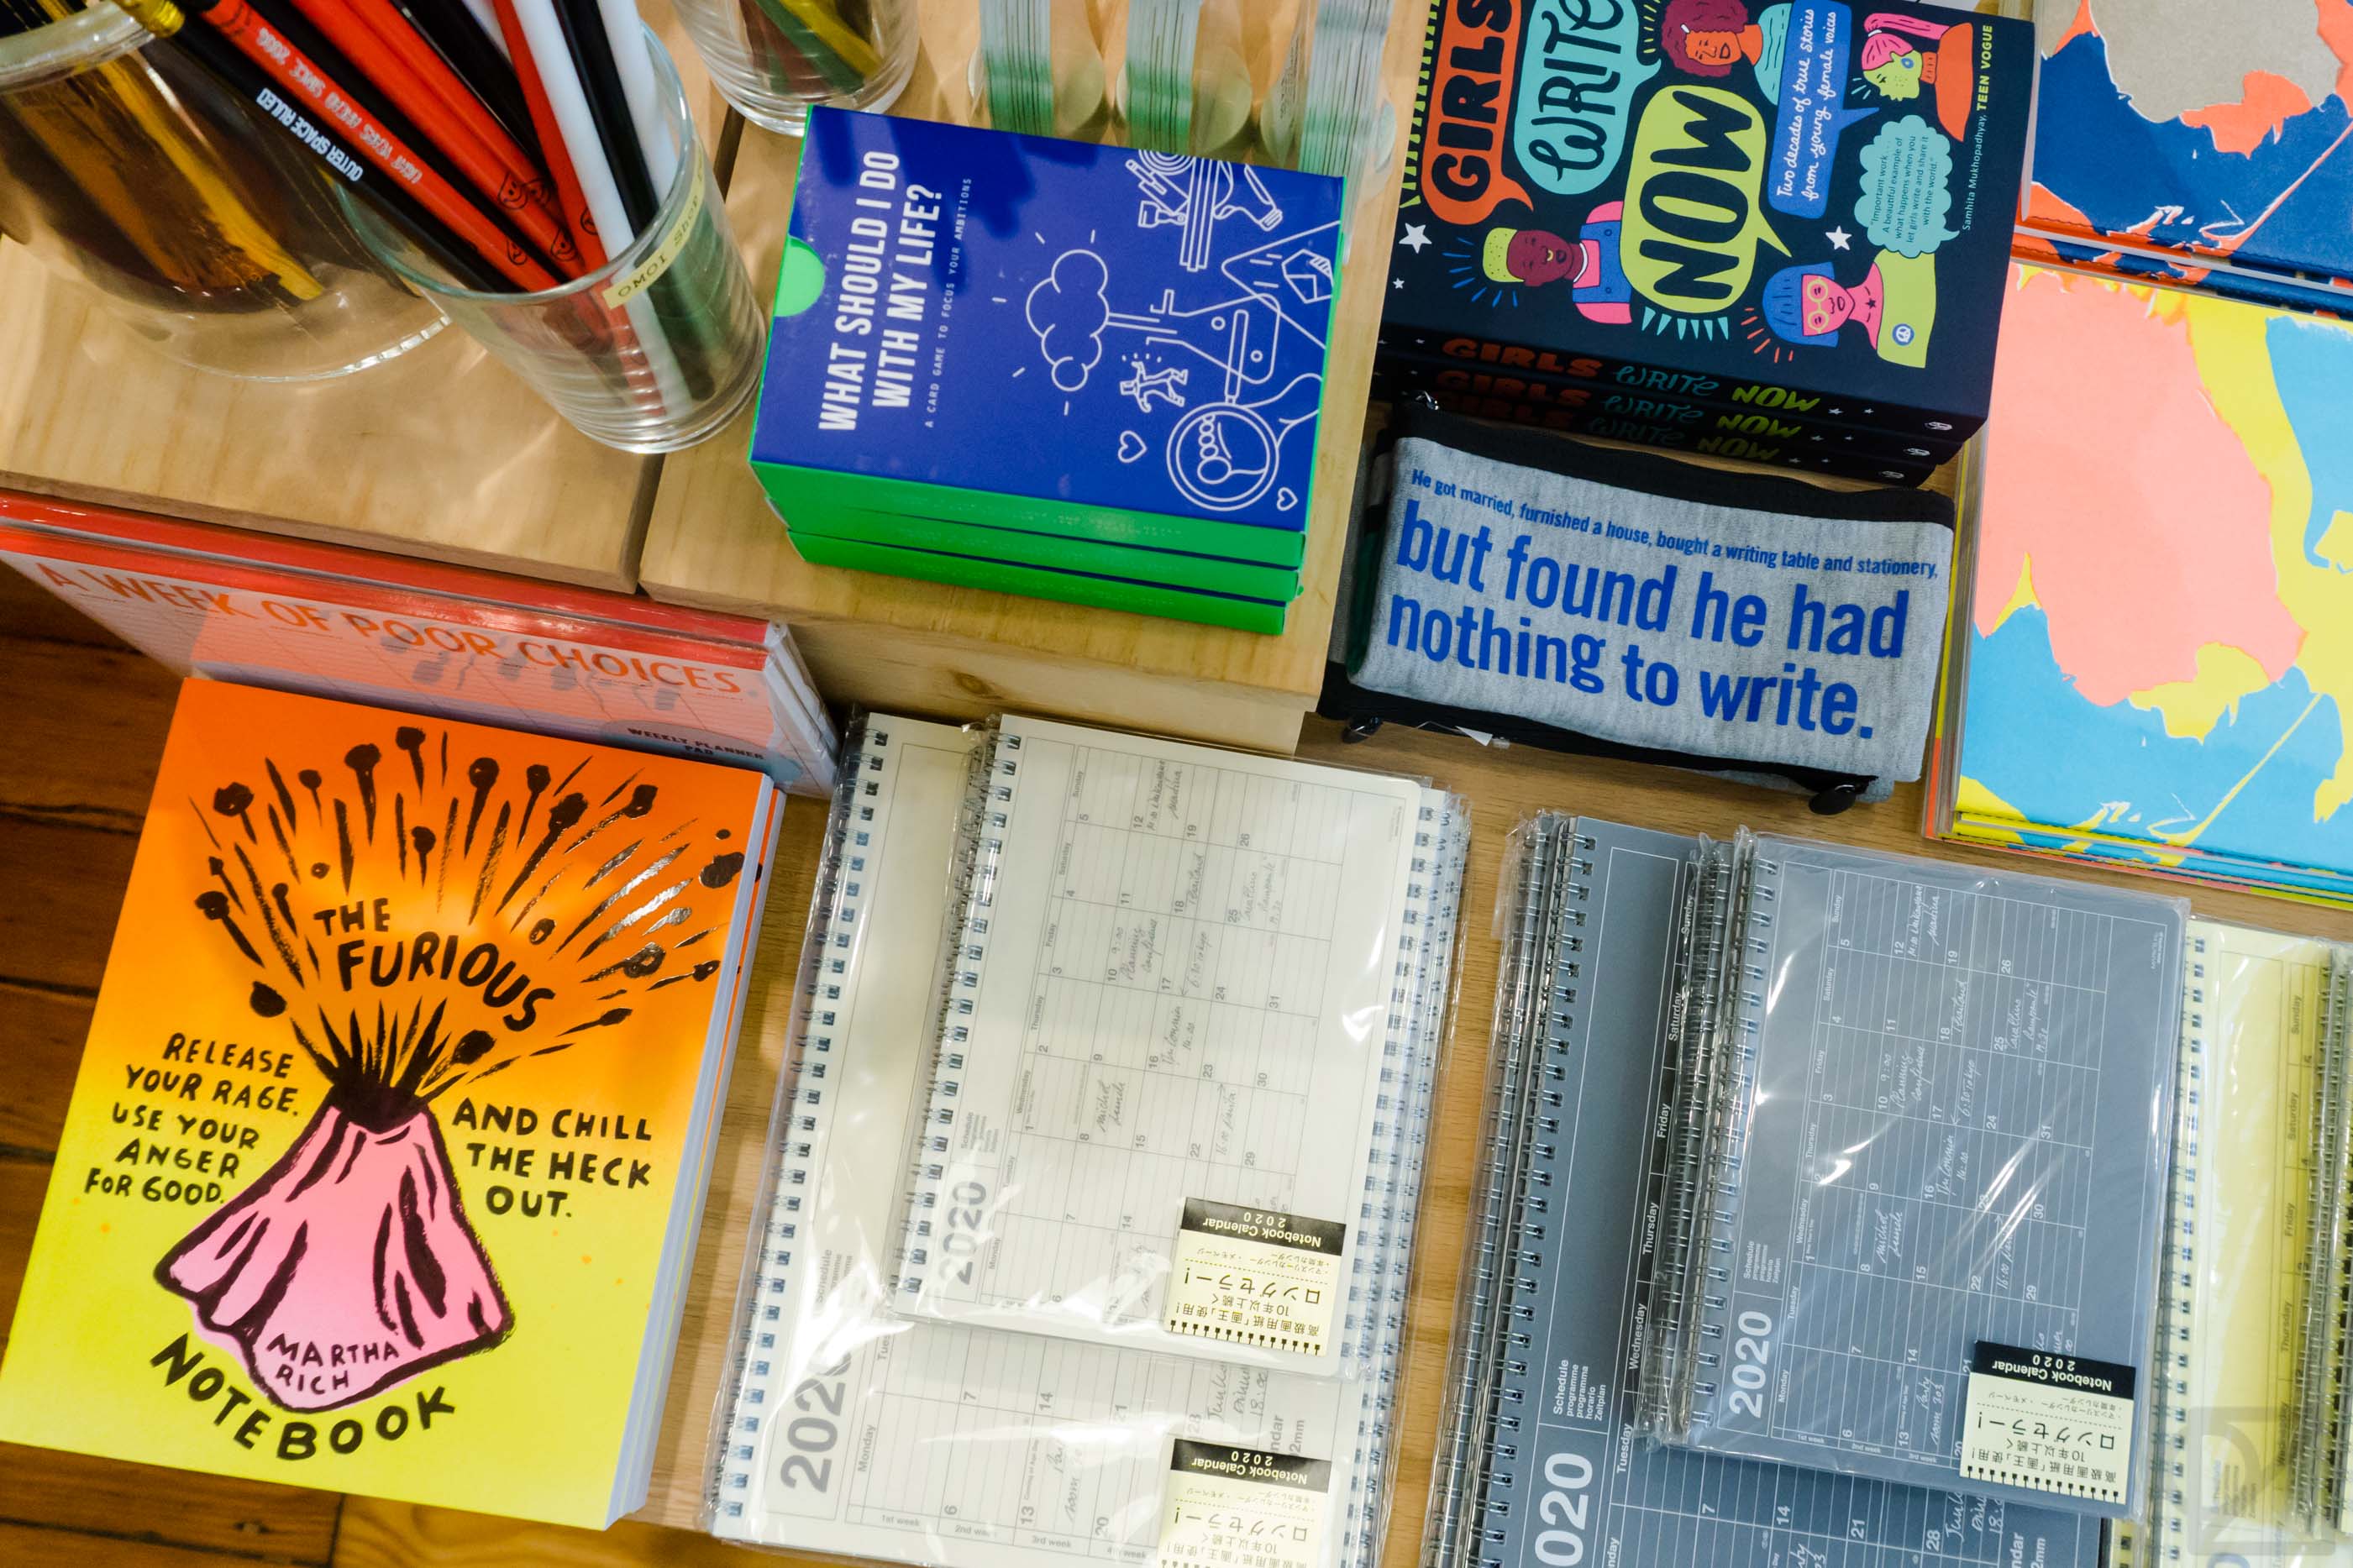 We've been increasing our amount of what we're calling journal adjacent items, like cool workbook style notebooks, prompt cards, and short story collections.